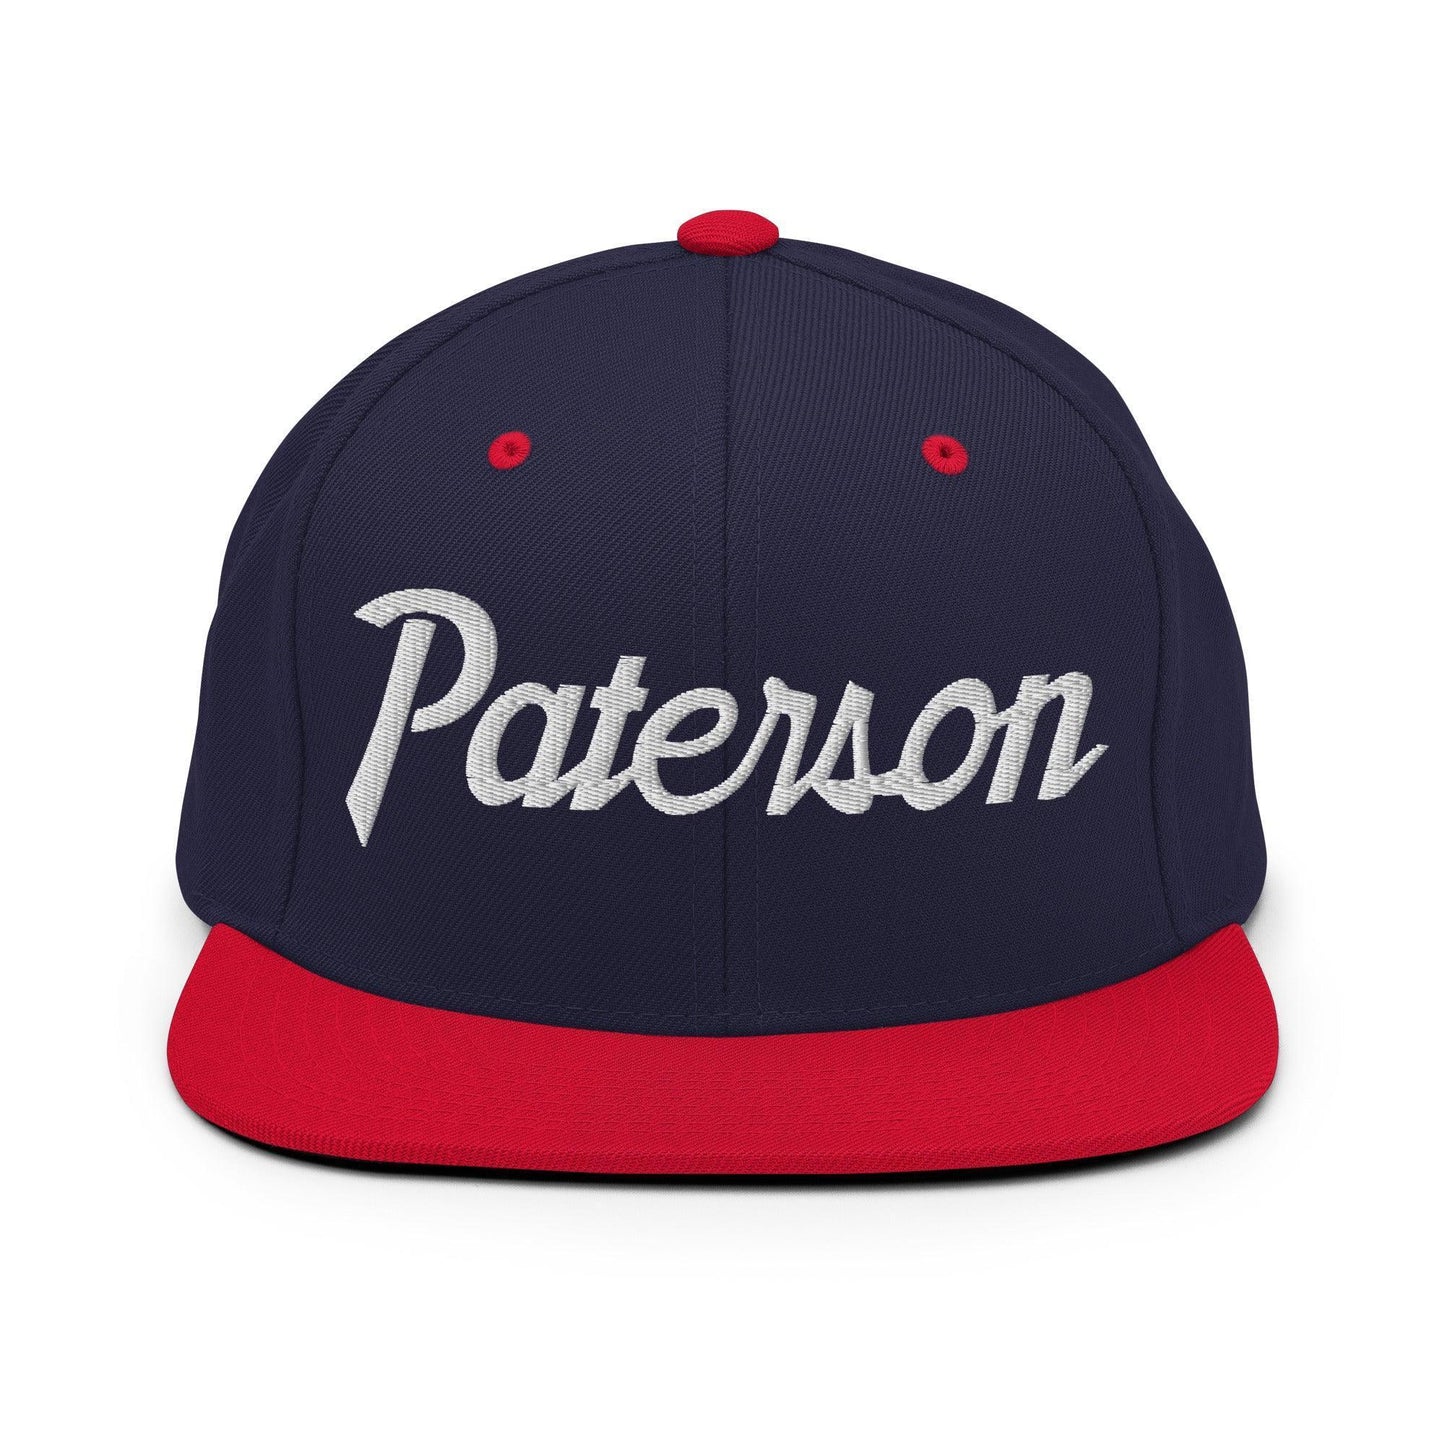 Paterson Script Snapback Hat Navy/ Red